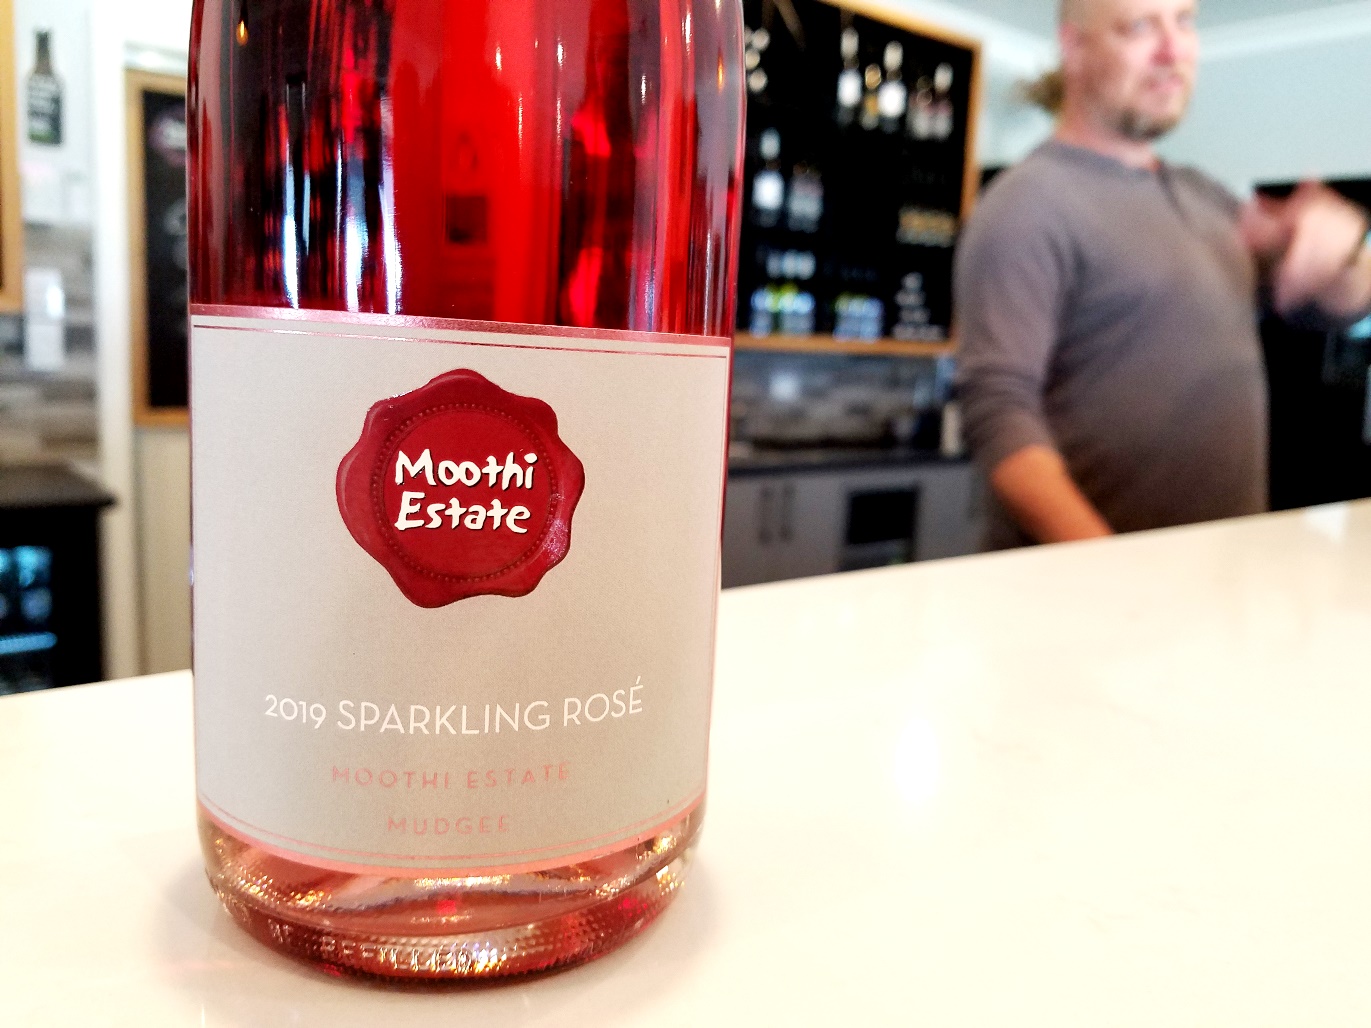 Moothi Estate, Sparkling Rosé 2019, Mudgee, New South Wales, Australia, Wine Casual